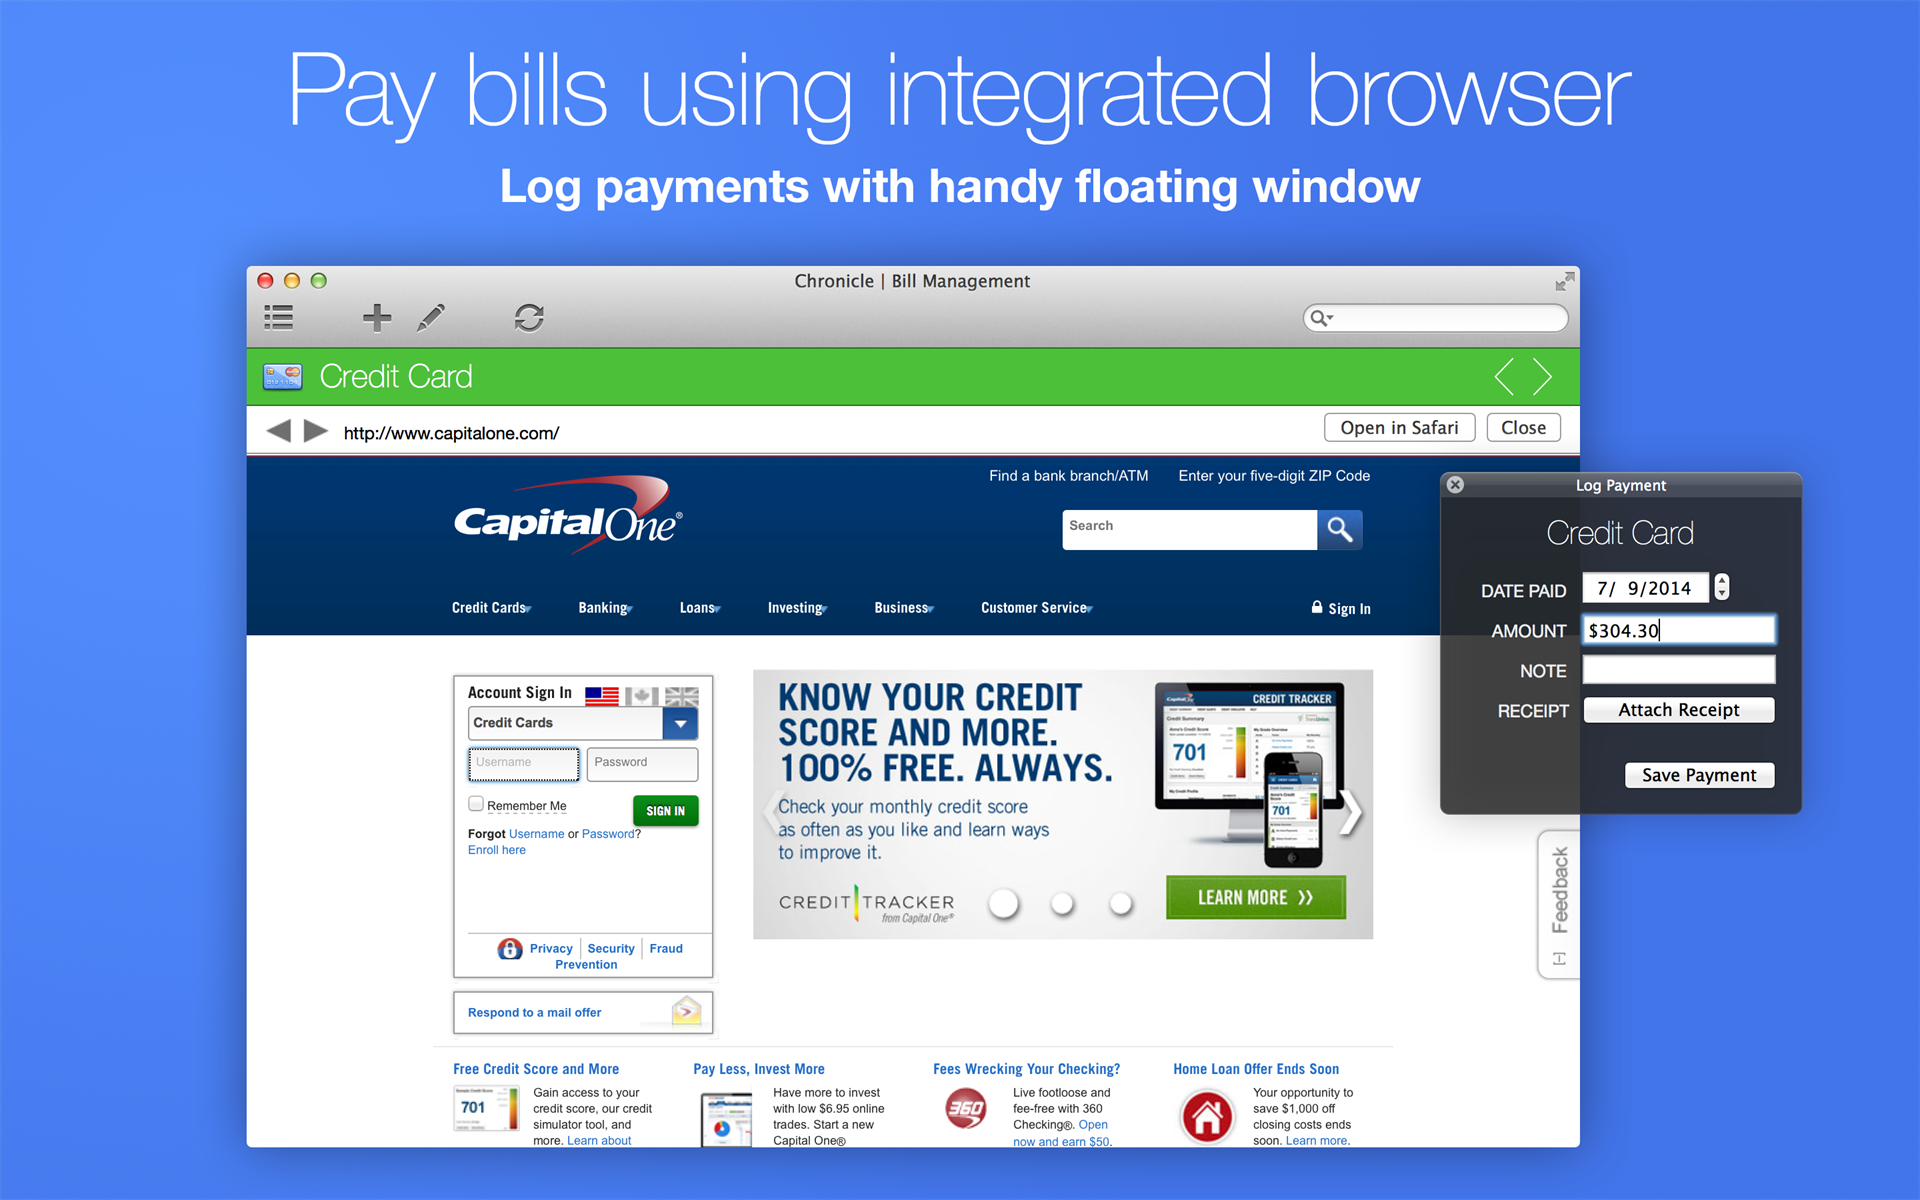 personal finance software for mac with bill pay